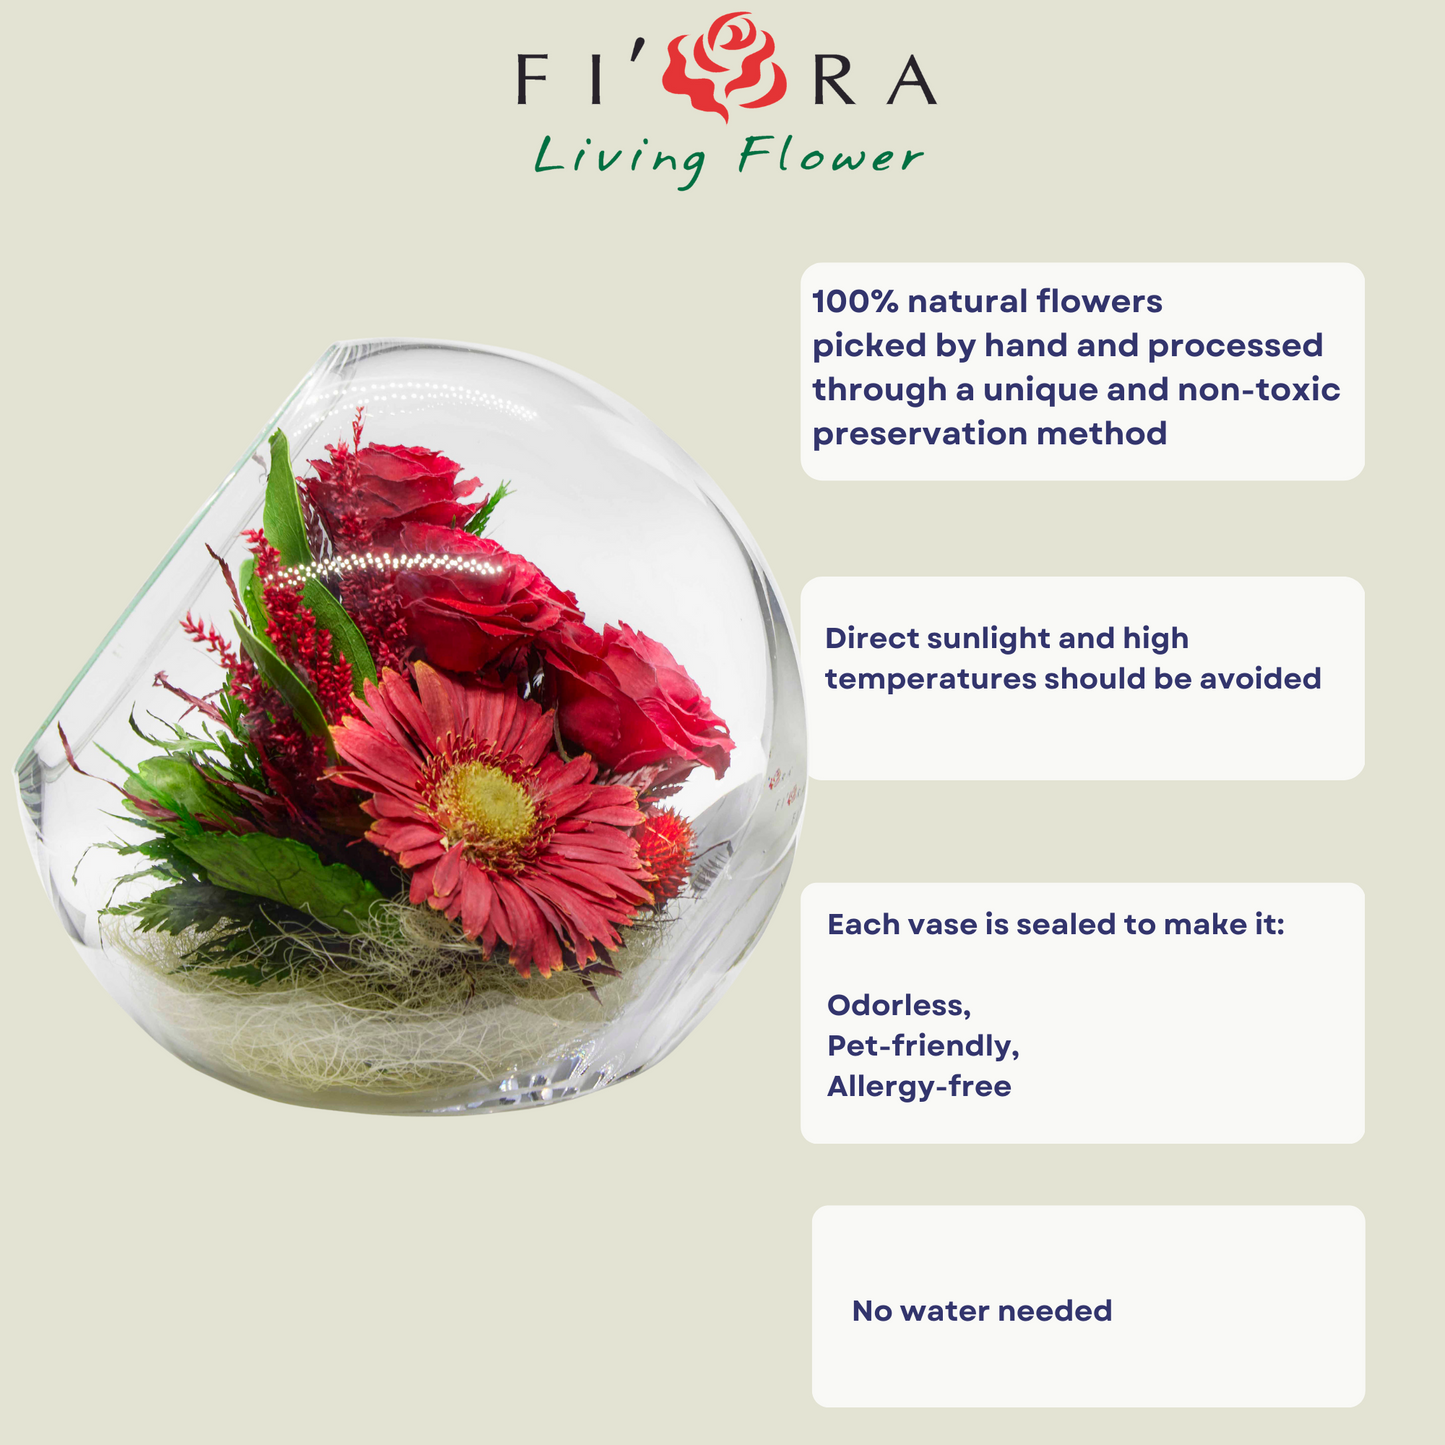 68614 Long-Lasting Roses and Gerbera in a Glass Vase